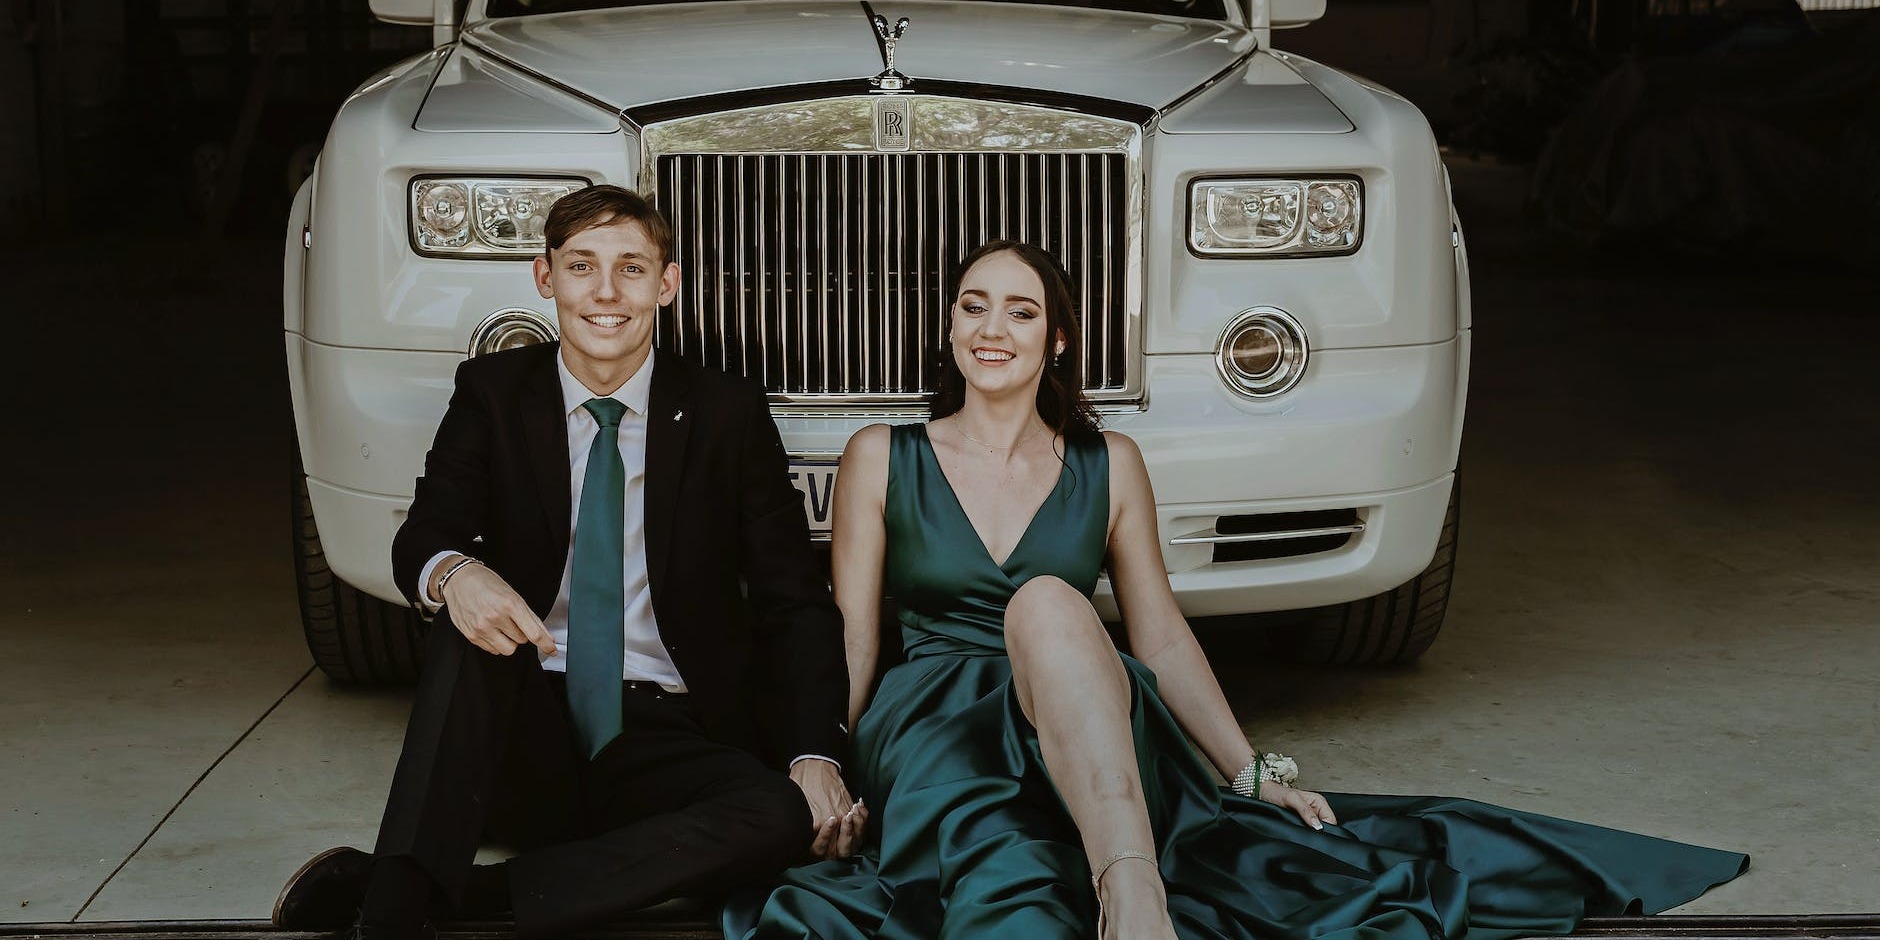 Top Tips for Making a Grand Entrance at Prom: Selecting the Perfect Car